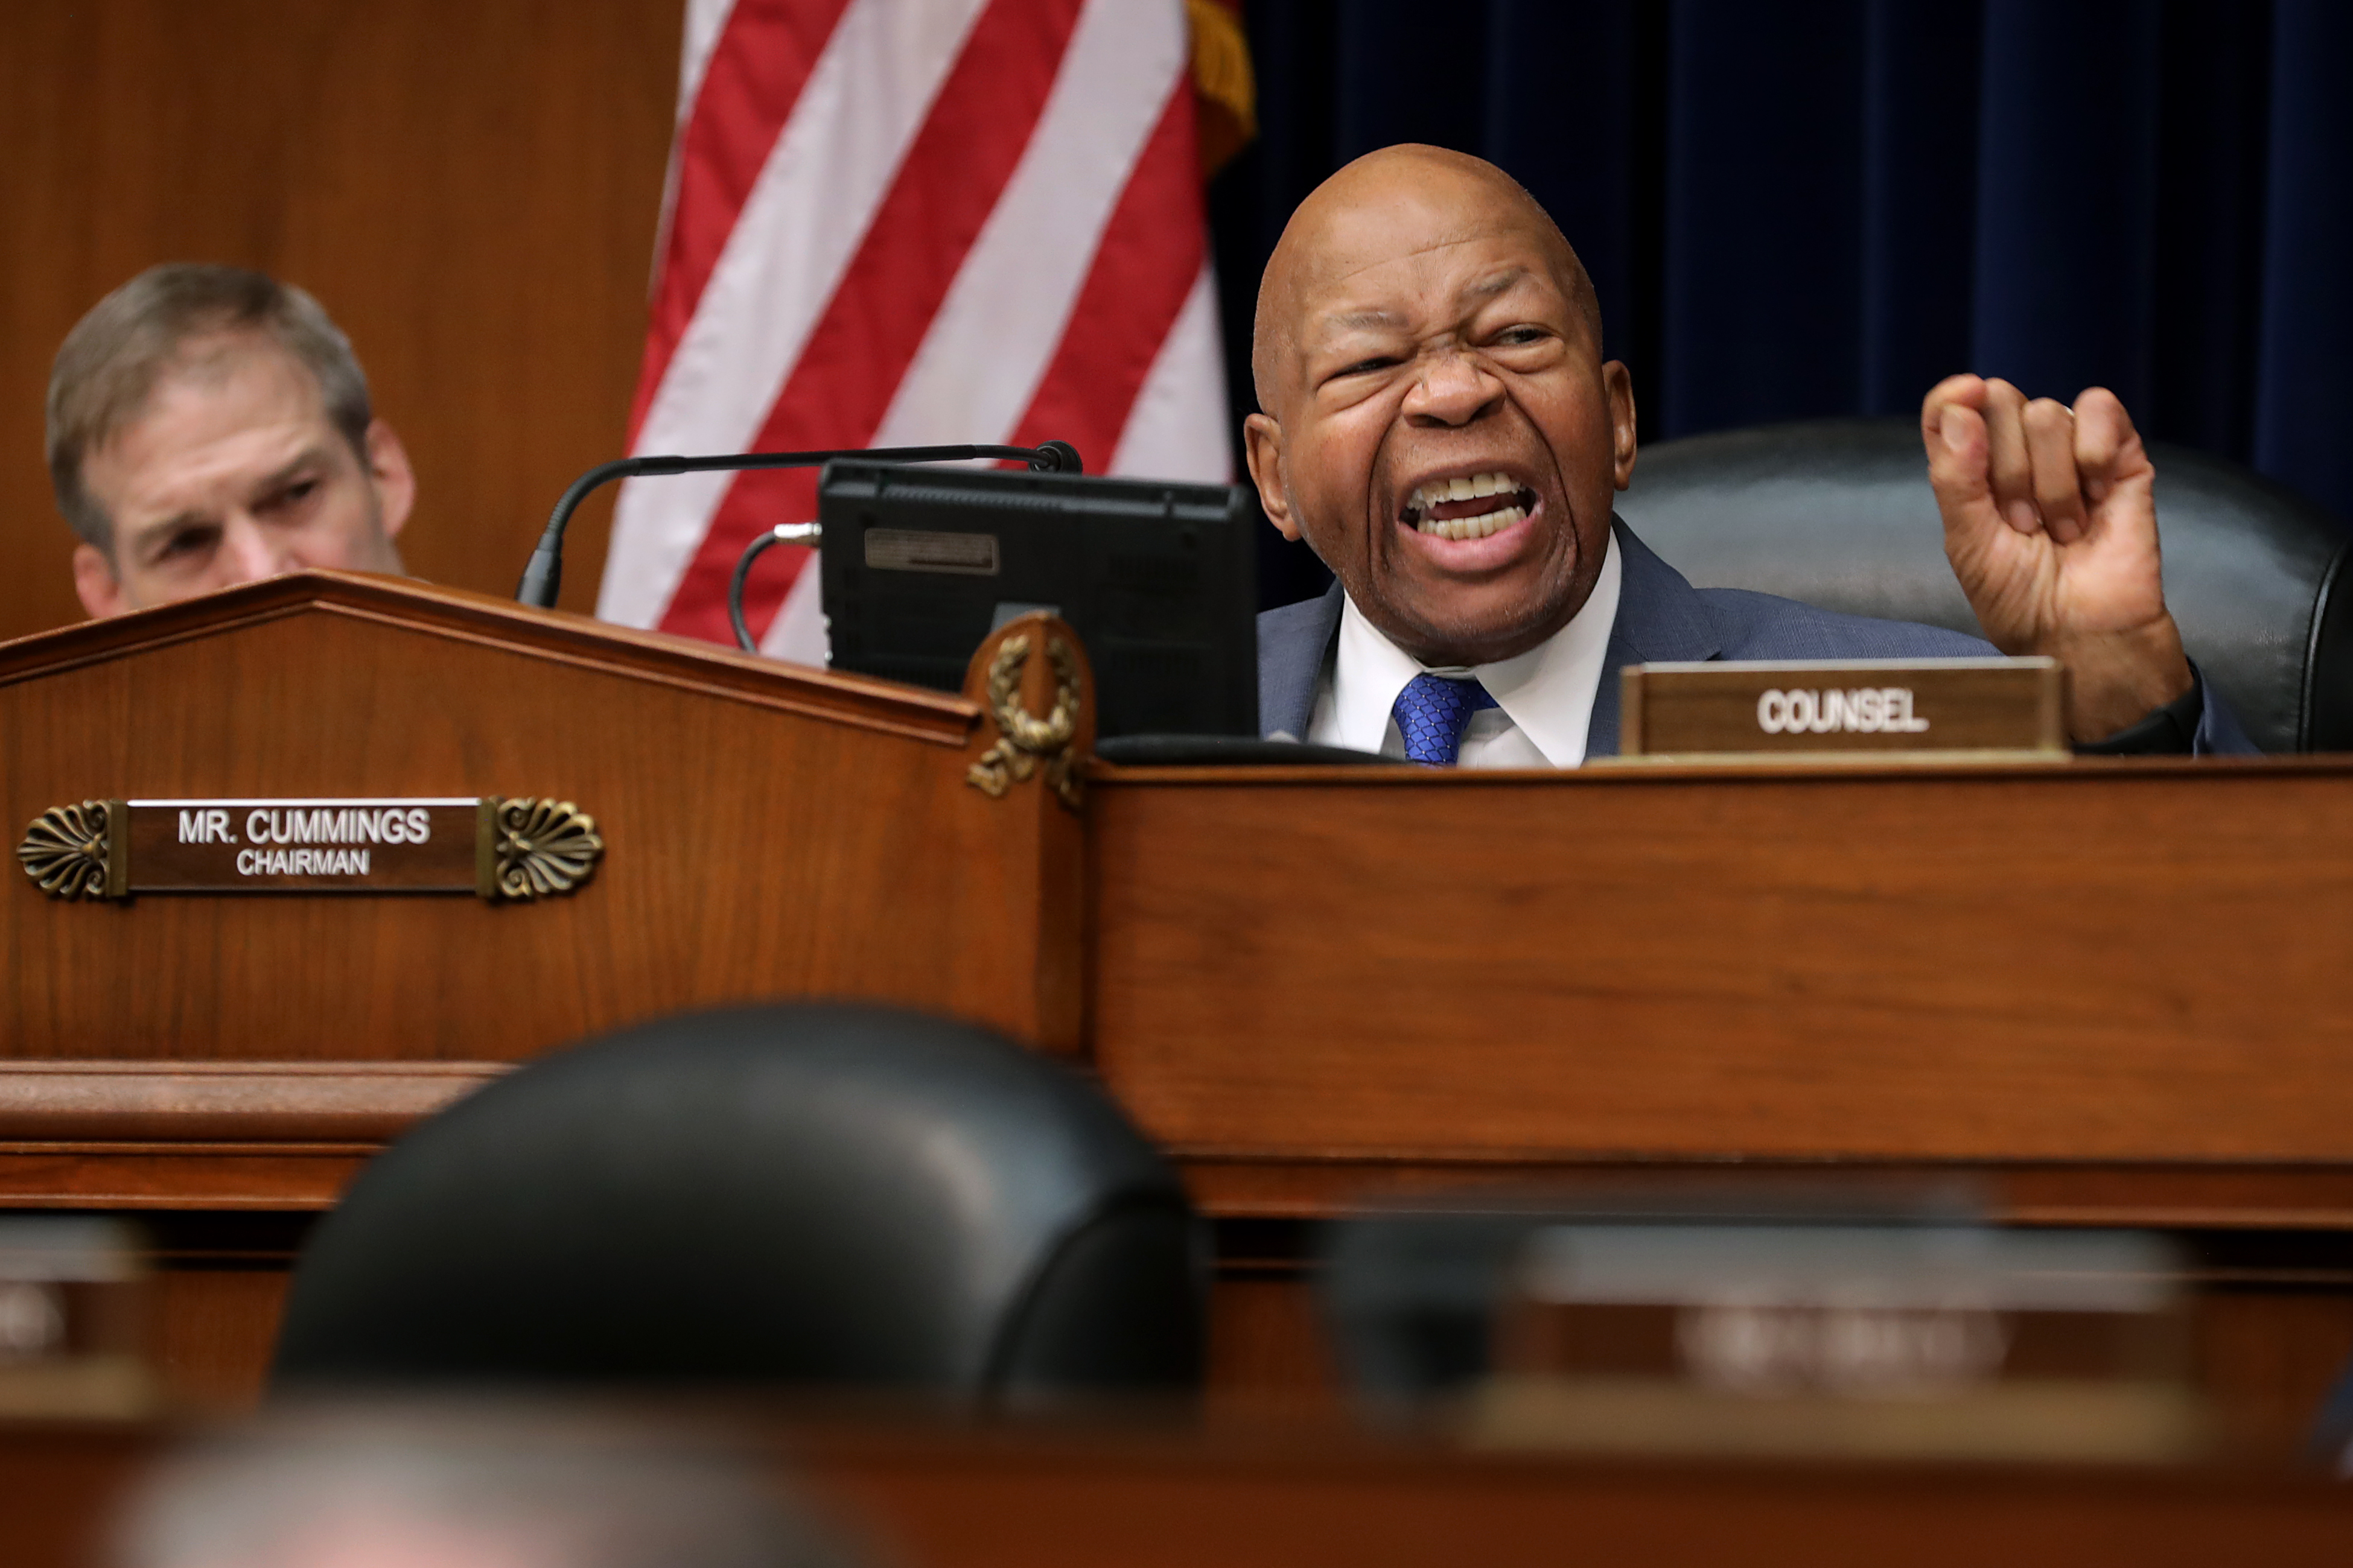 WASHINGTON, DC - FEBRUARY 27: House Oversight and Government Reform Committee Chairman Elijah Cummings (D-MD) makes closing remarks after testimony from Michael Cohen, former attorney and fixer for President Donald Trump, in the Rayburn House Office Building on Capitol Hill February 27, 2019 in Washington, DC. Last year Cohen was sentenced to three years in prison and ordered to pay a $50,000 fine for tax evasion, making false statements to a financial institution, unlawful excessive campaign contributions and lying to Congress as part of special counsel Robert Mueller's investigation into Russian meddling in the 2016 presidential elections. (Photo by Chip Somodevilla/Getty Images)